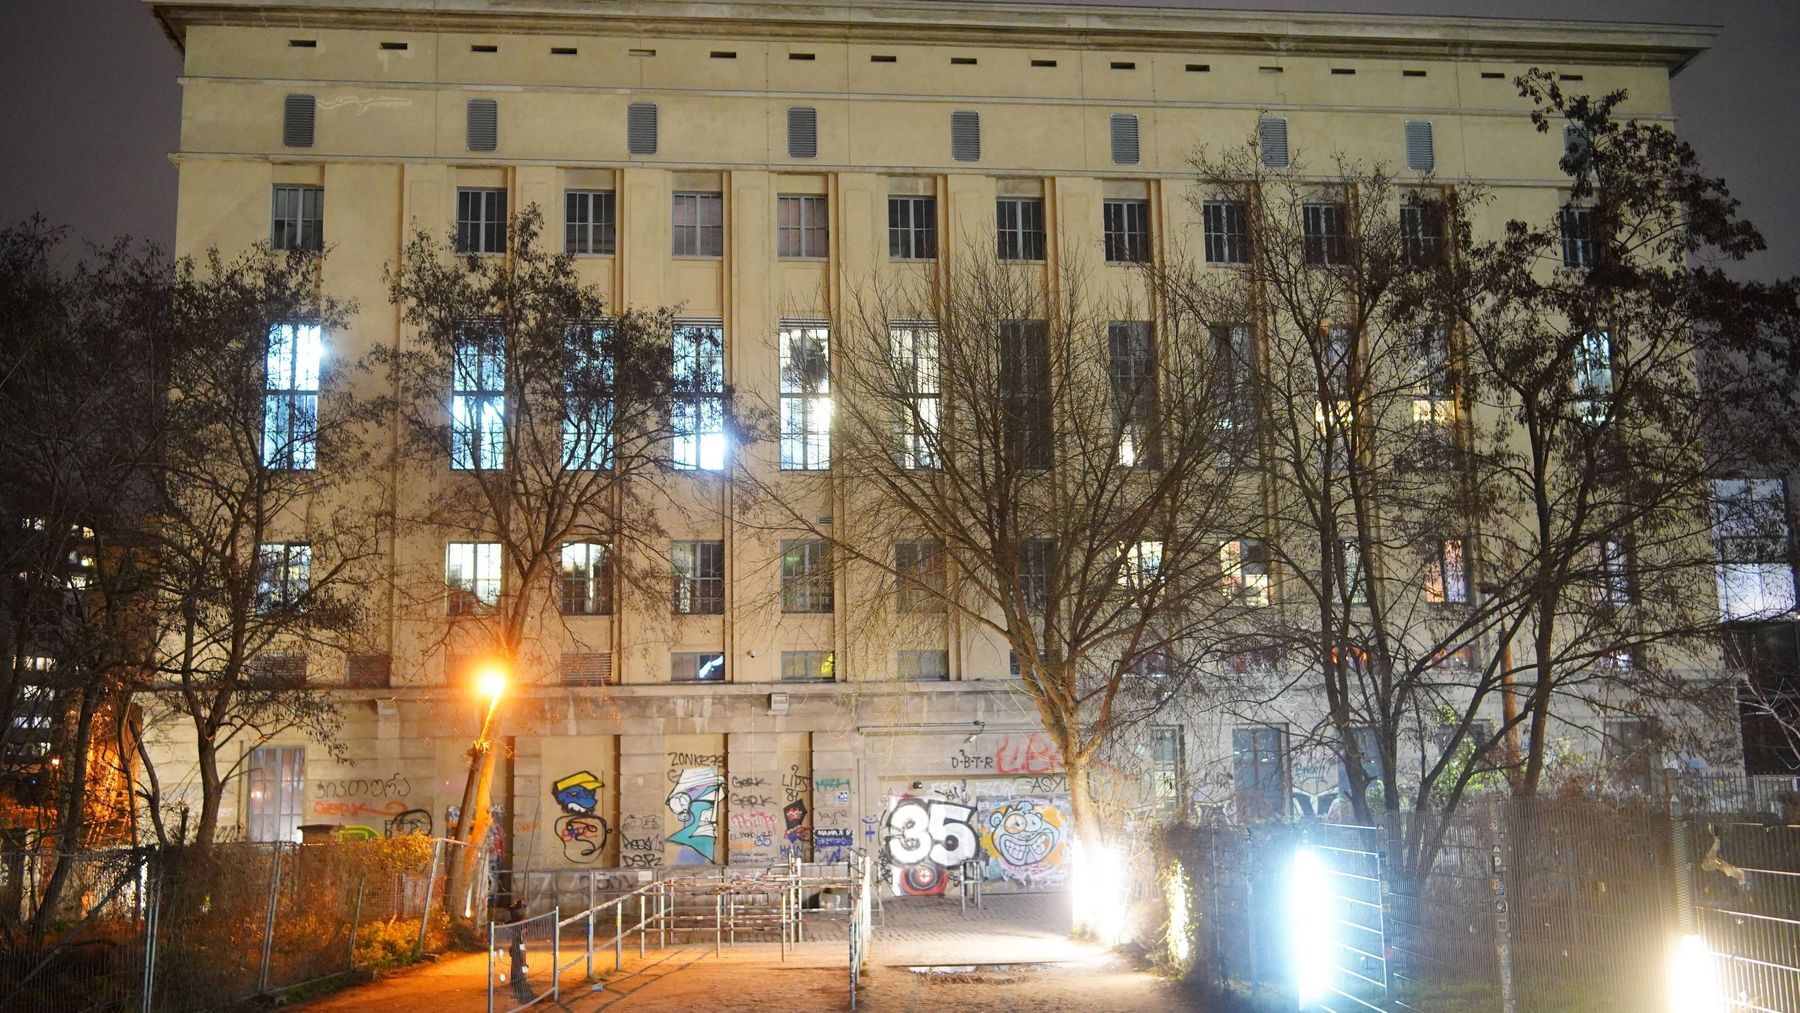 Rumor about Berghain - Has the world's most famous techno club closed down?